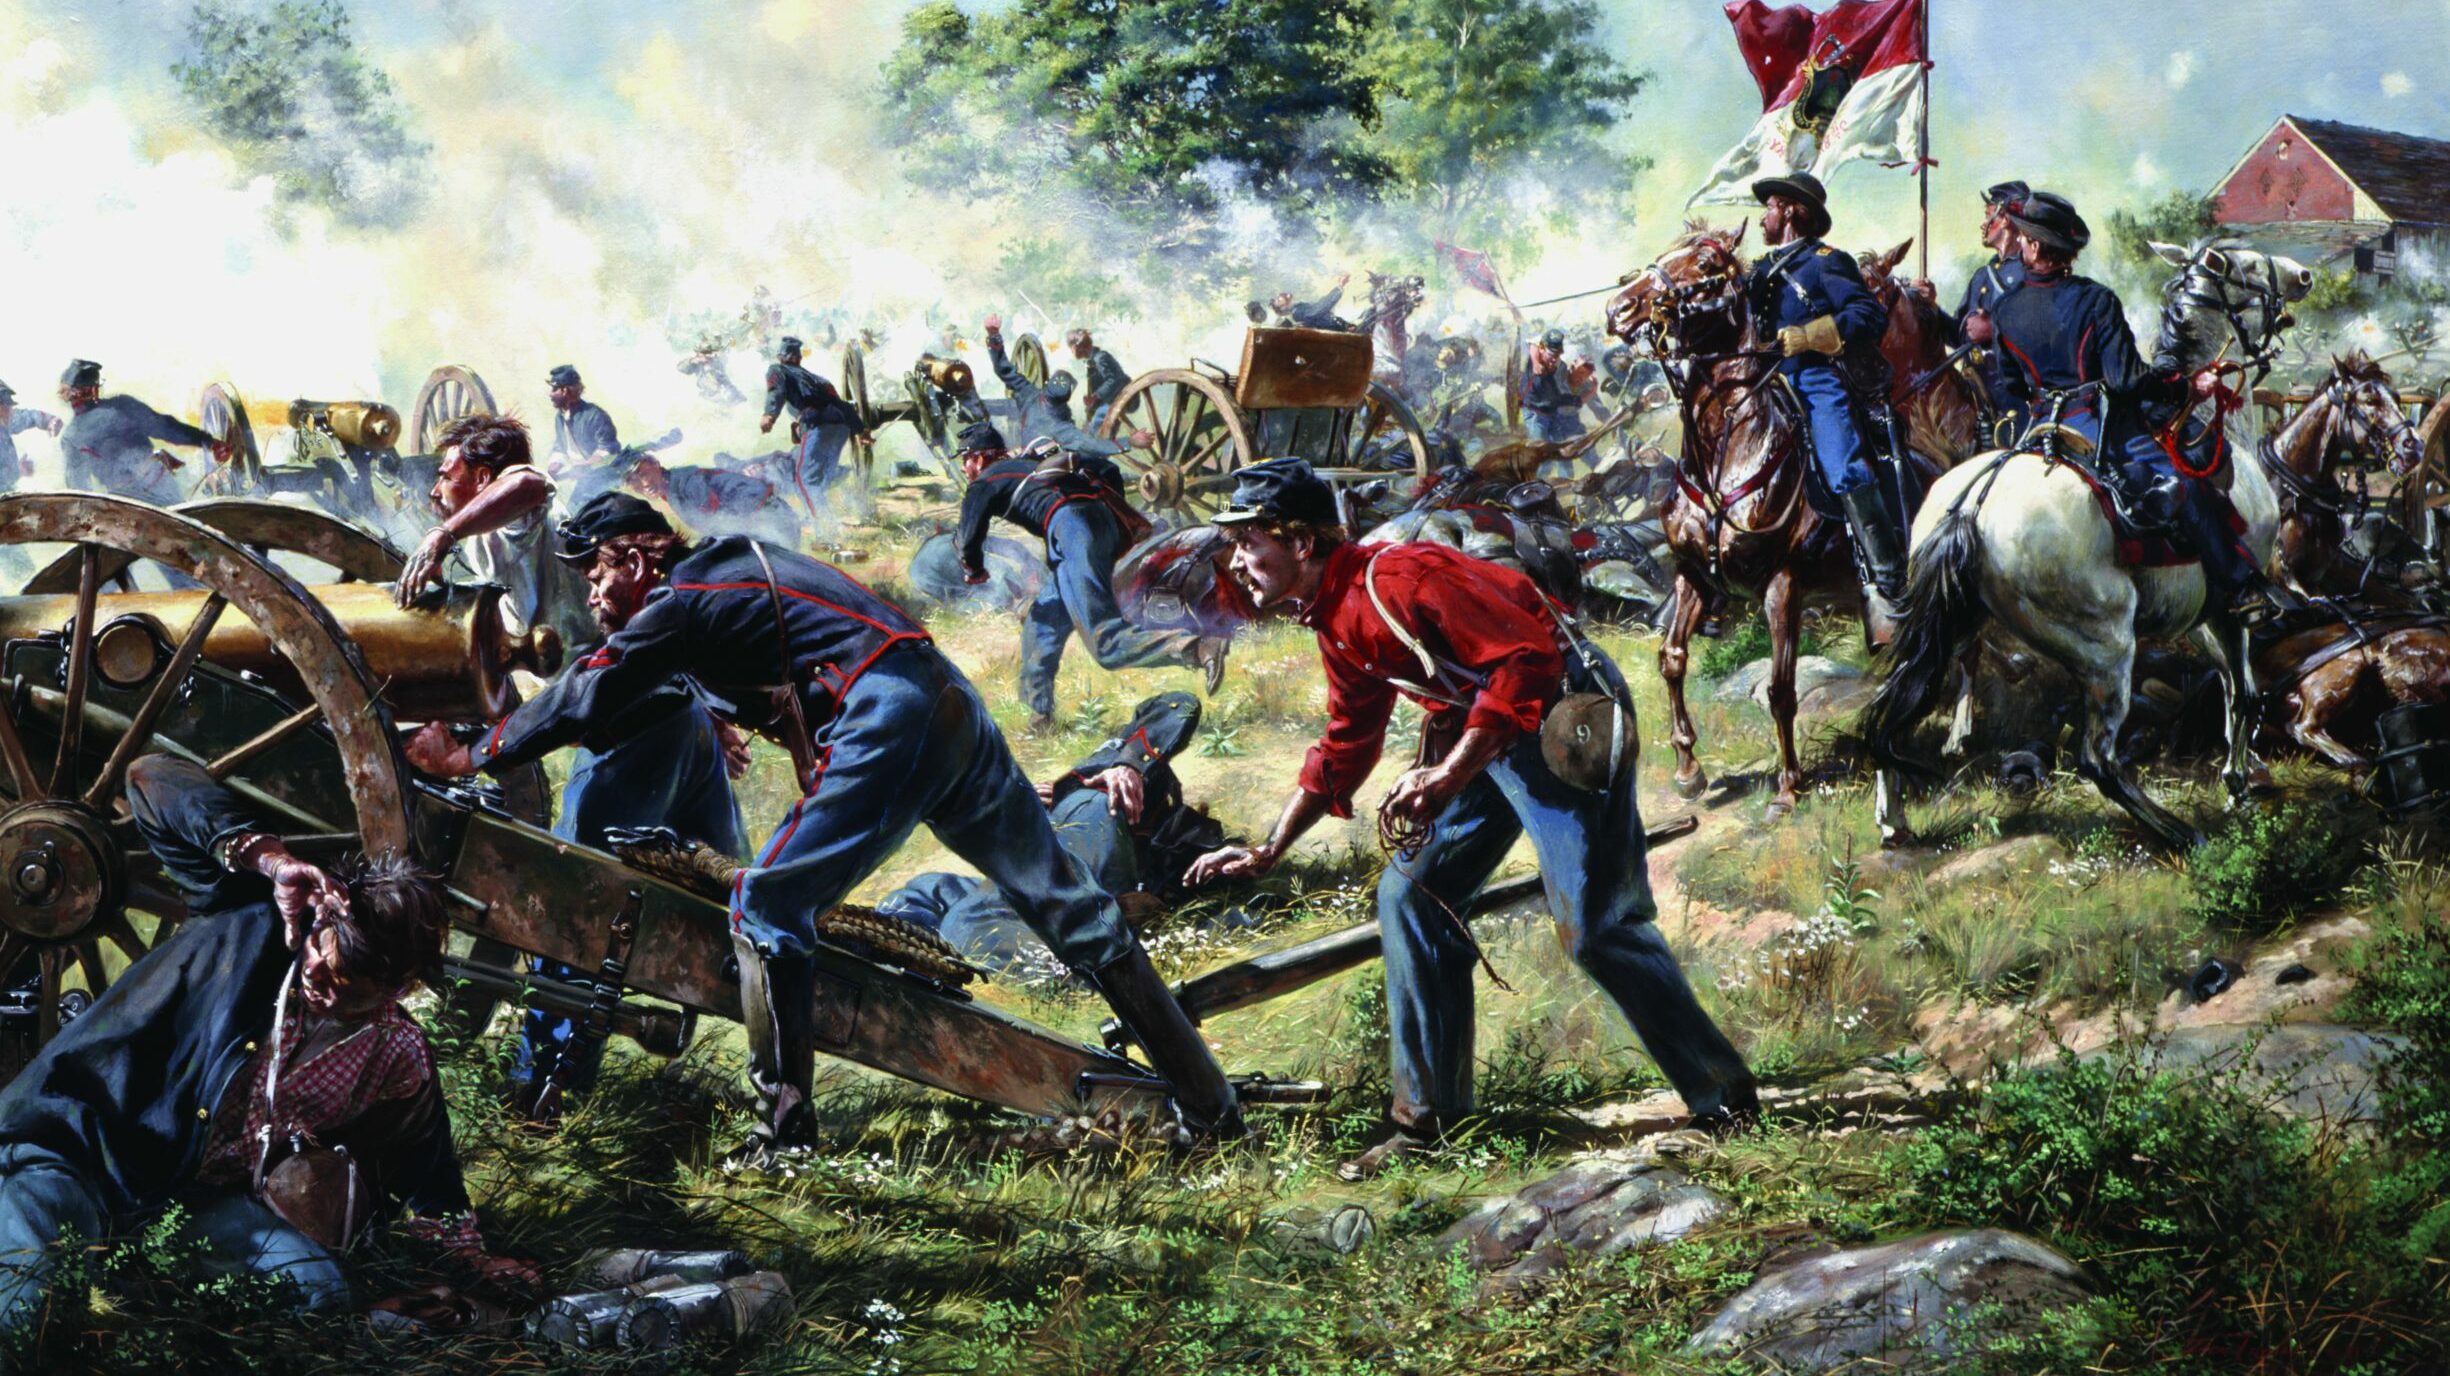 The 9th Massachusetts Battery fights a desperate rear-guard action near the Trostle Farm at Gettysburg, July 2, 1863. Painting by Don Troiani.